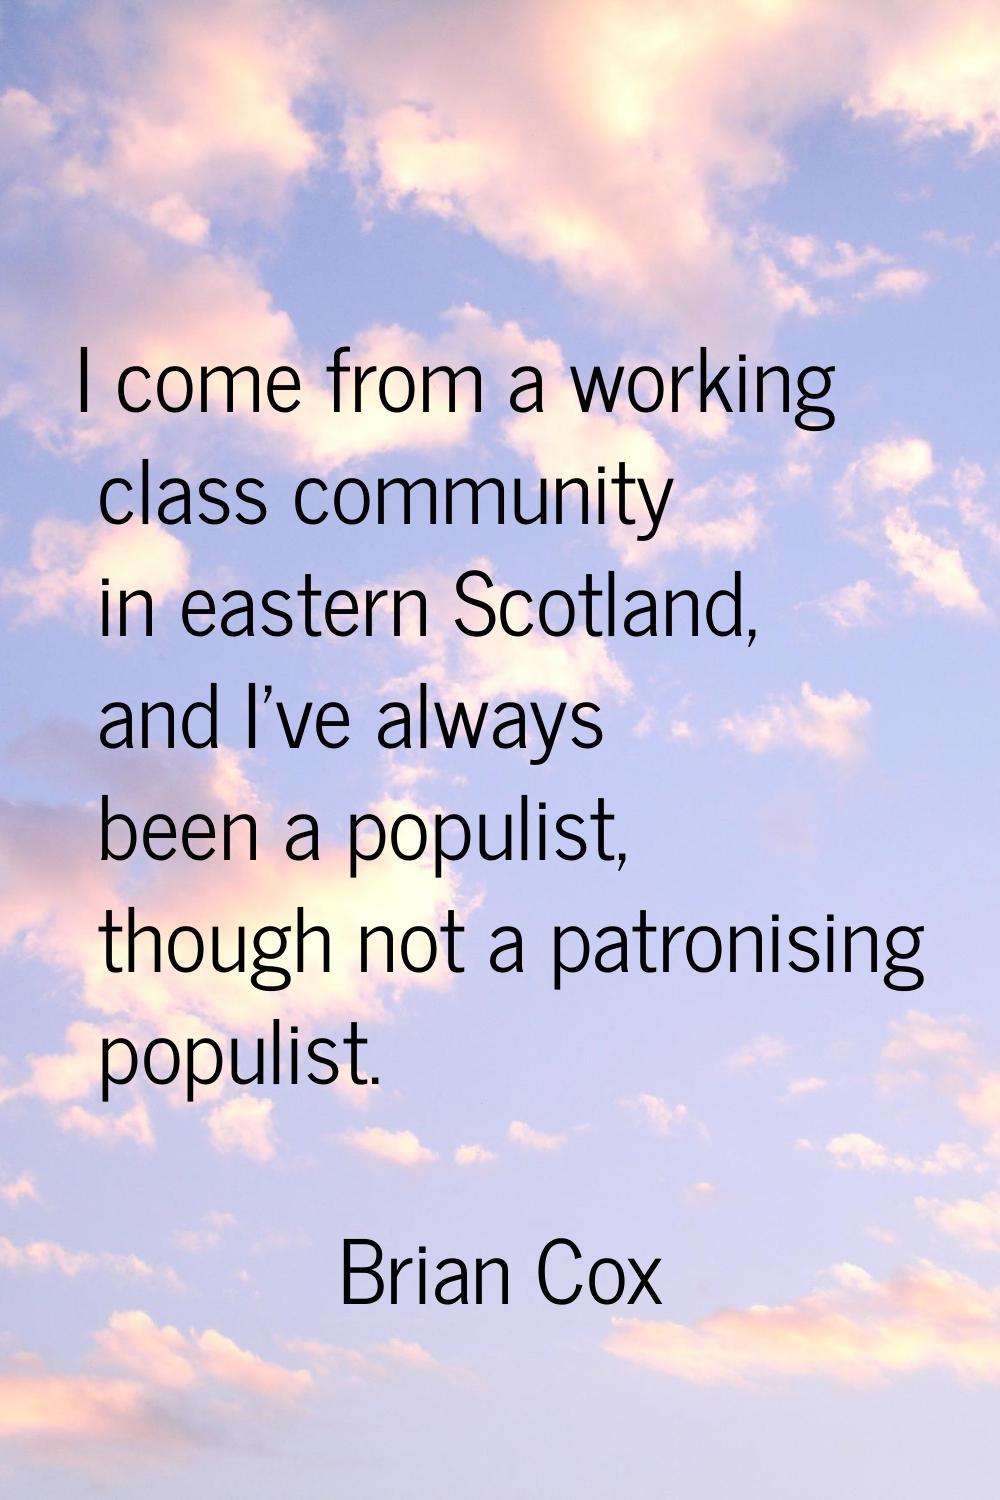 I come from a working class community in eastern Scotland, and I've always been a populist, though 